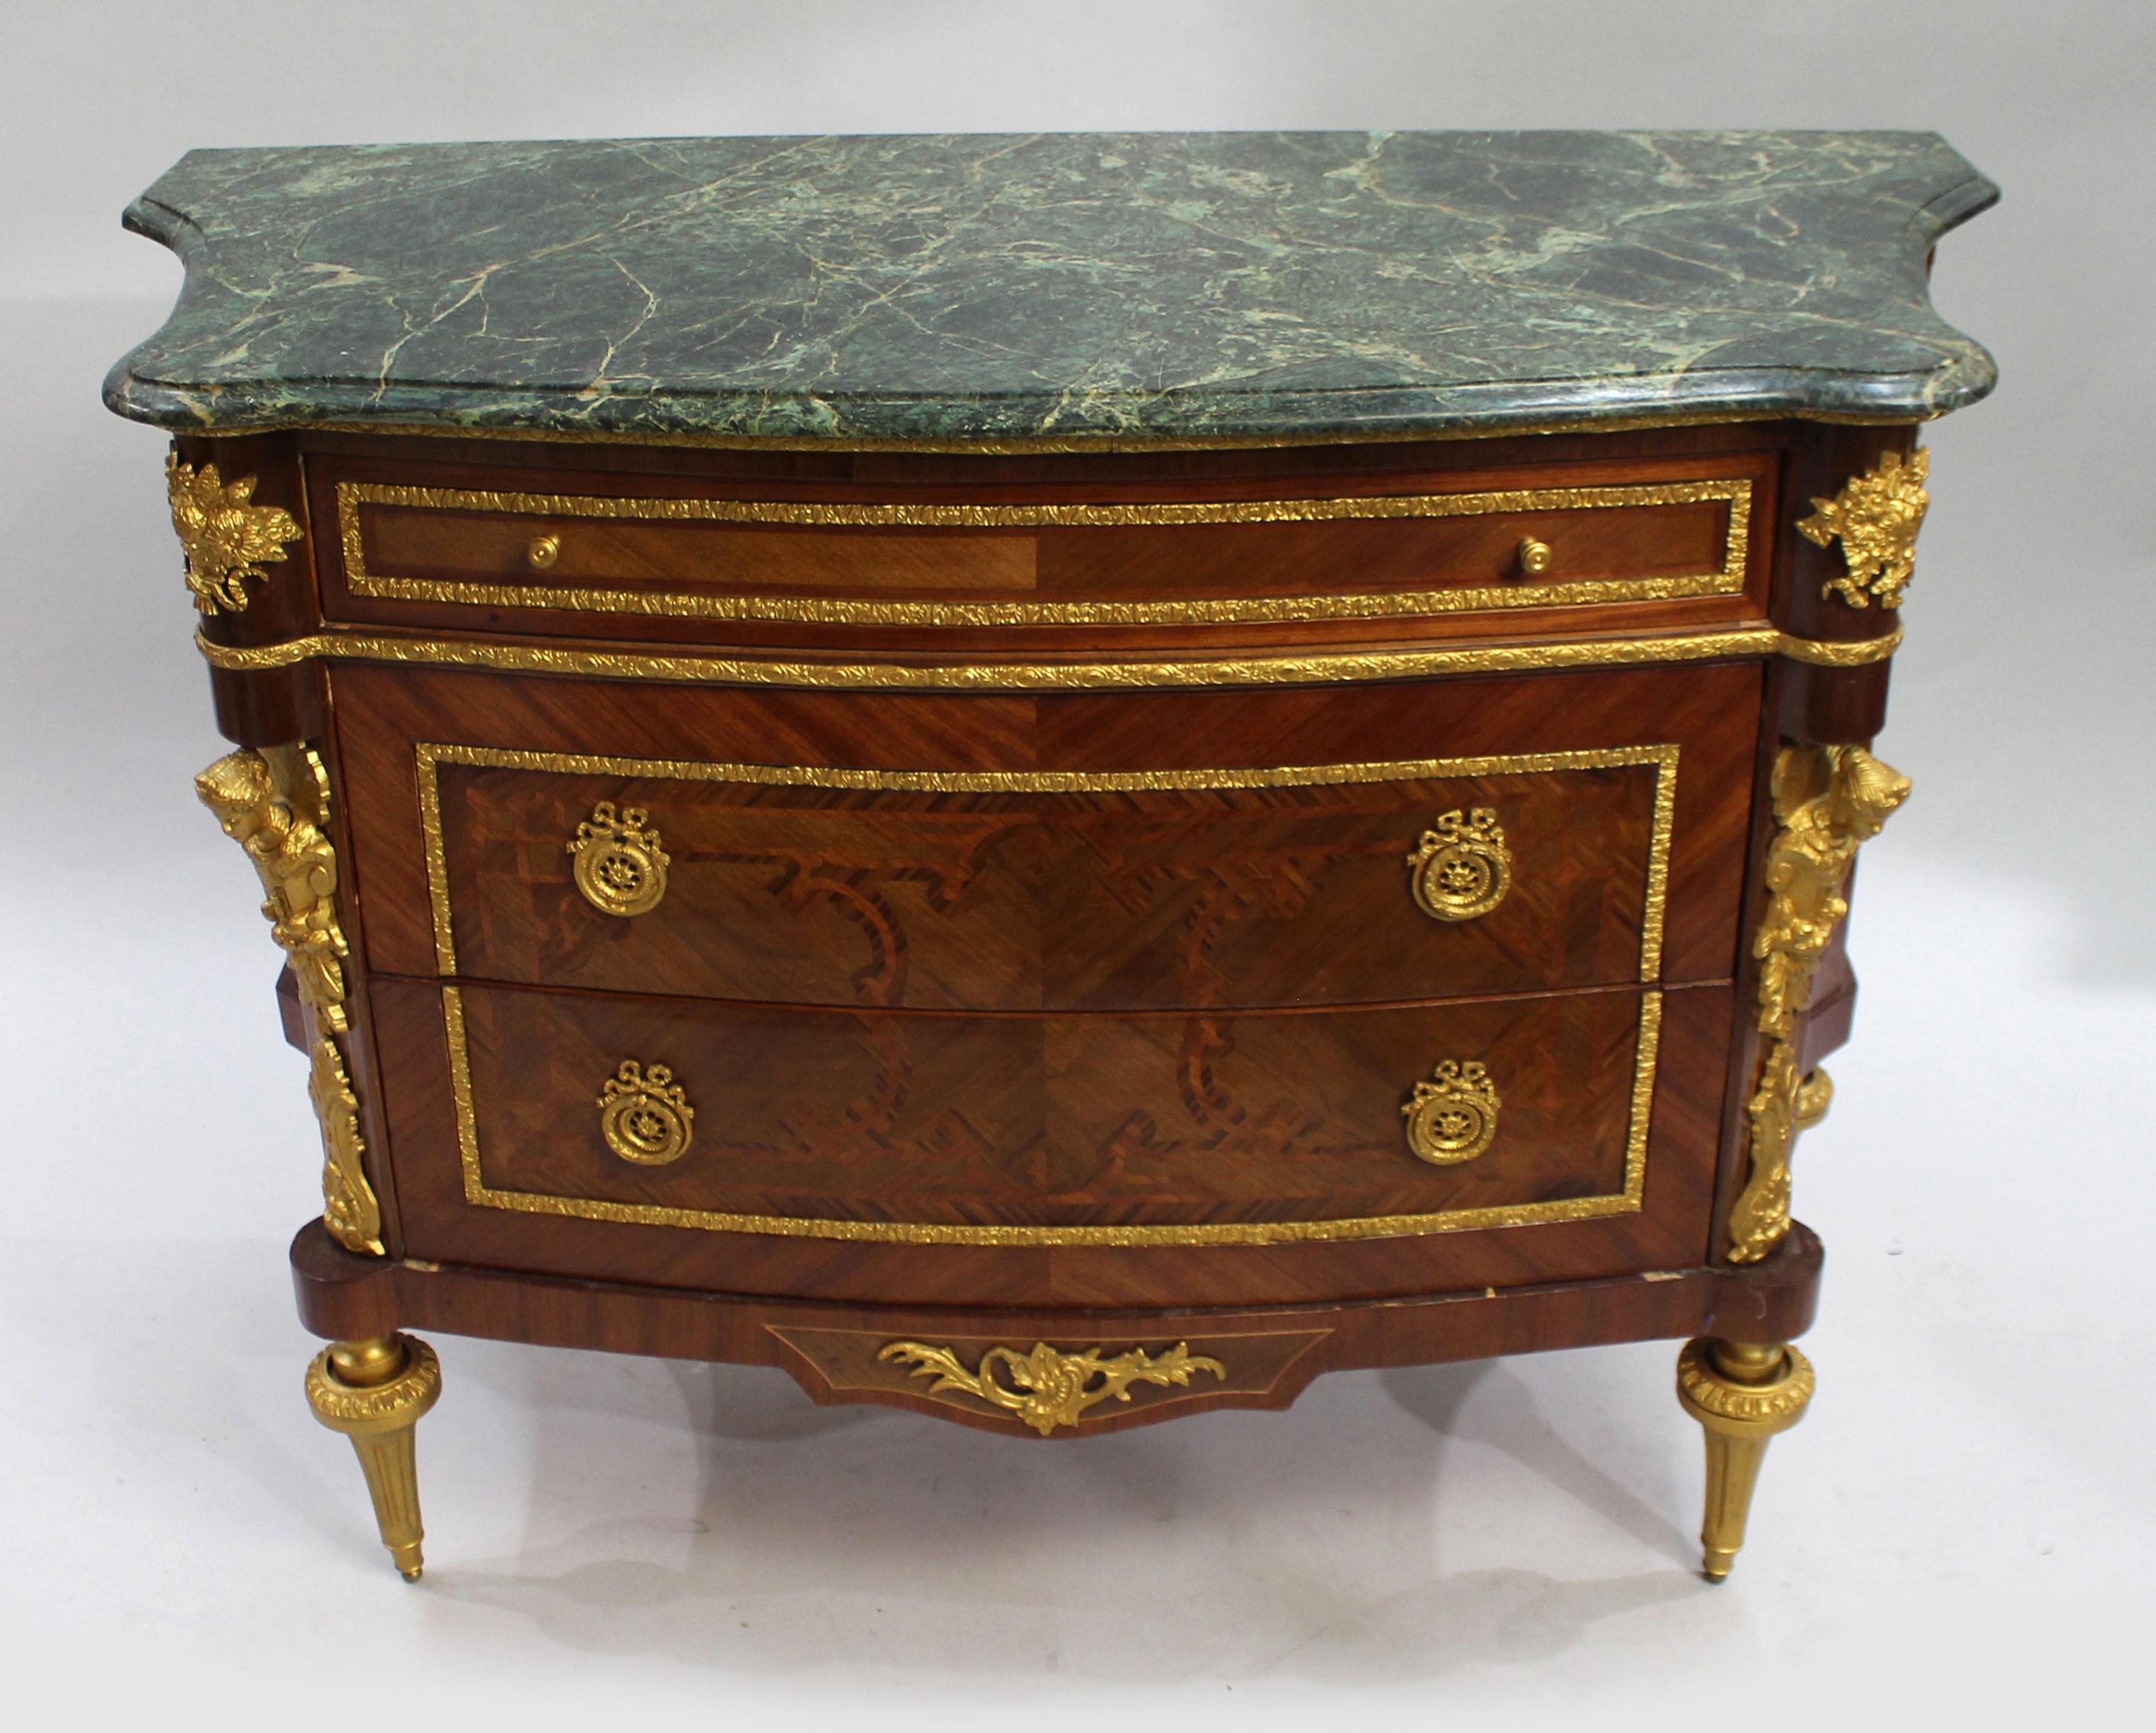 European French Marble Topped Bow Fronted Commode with Gilt Metal Mounts For Sale